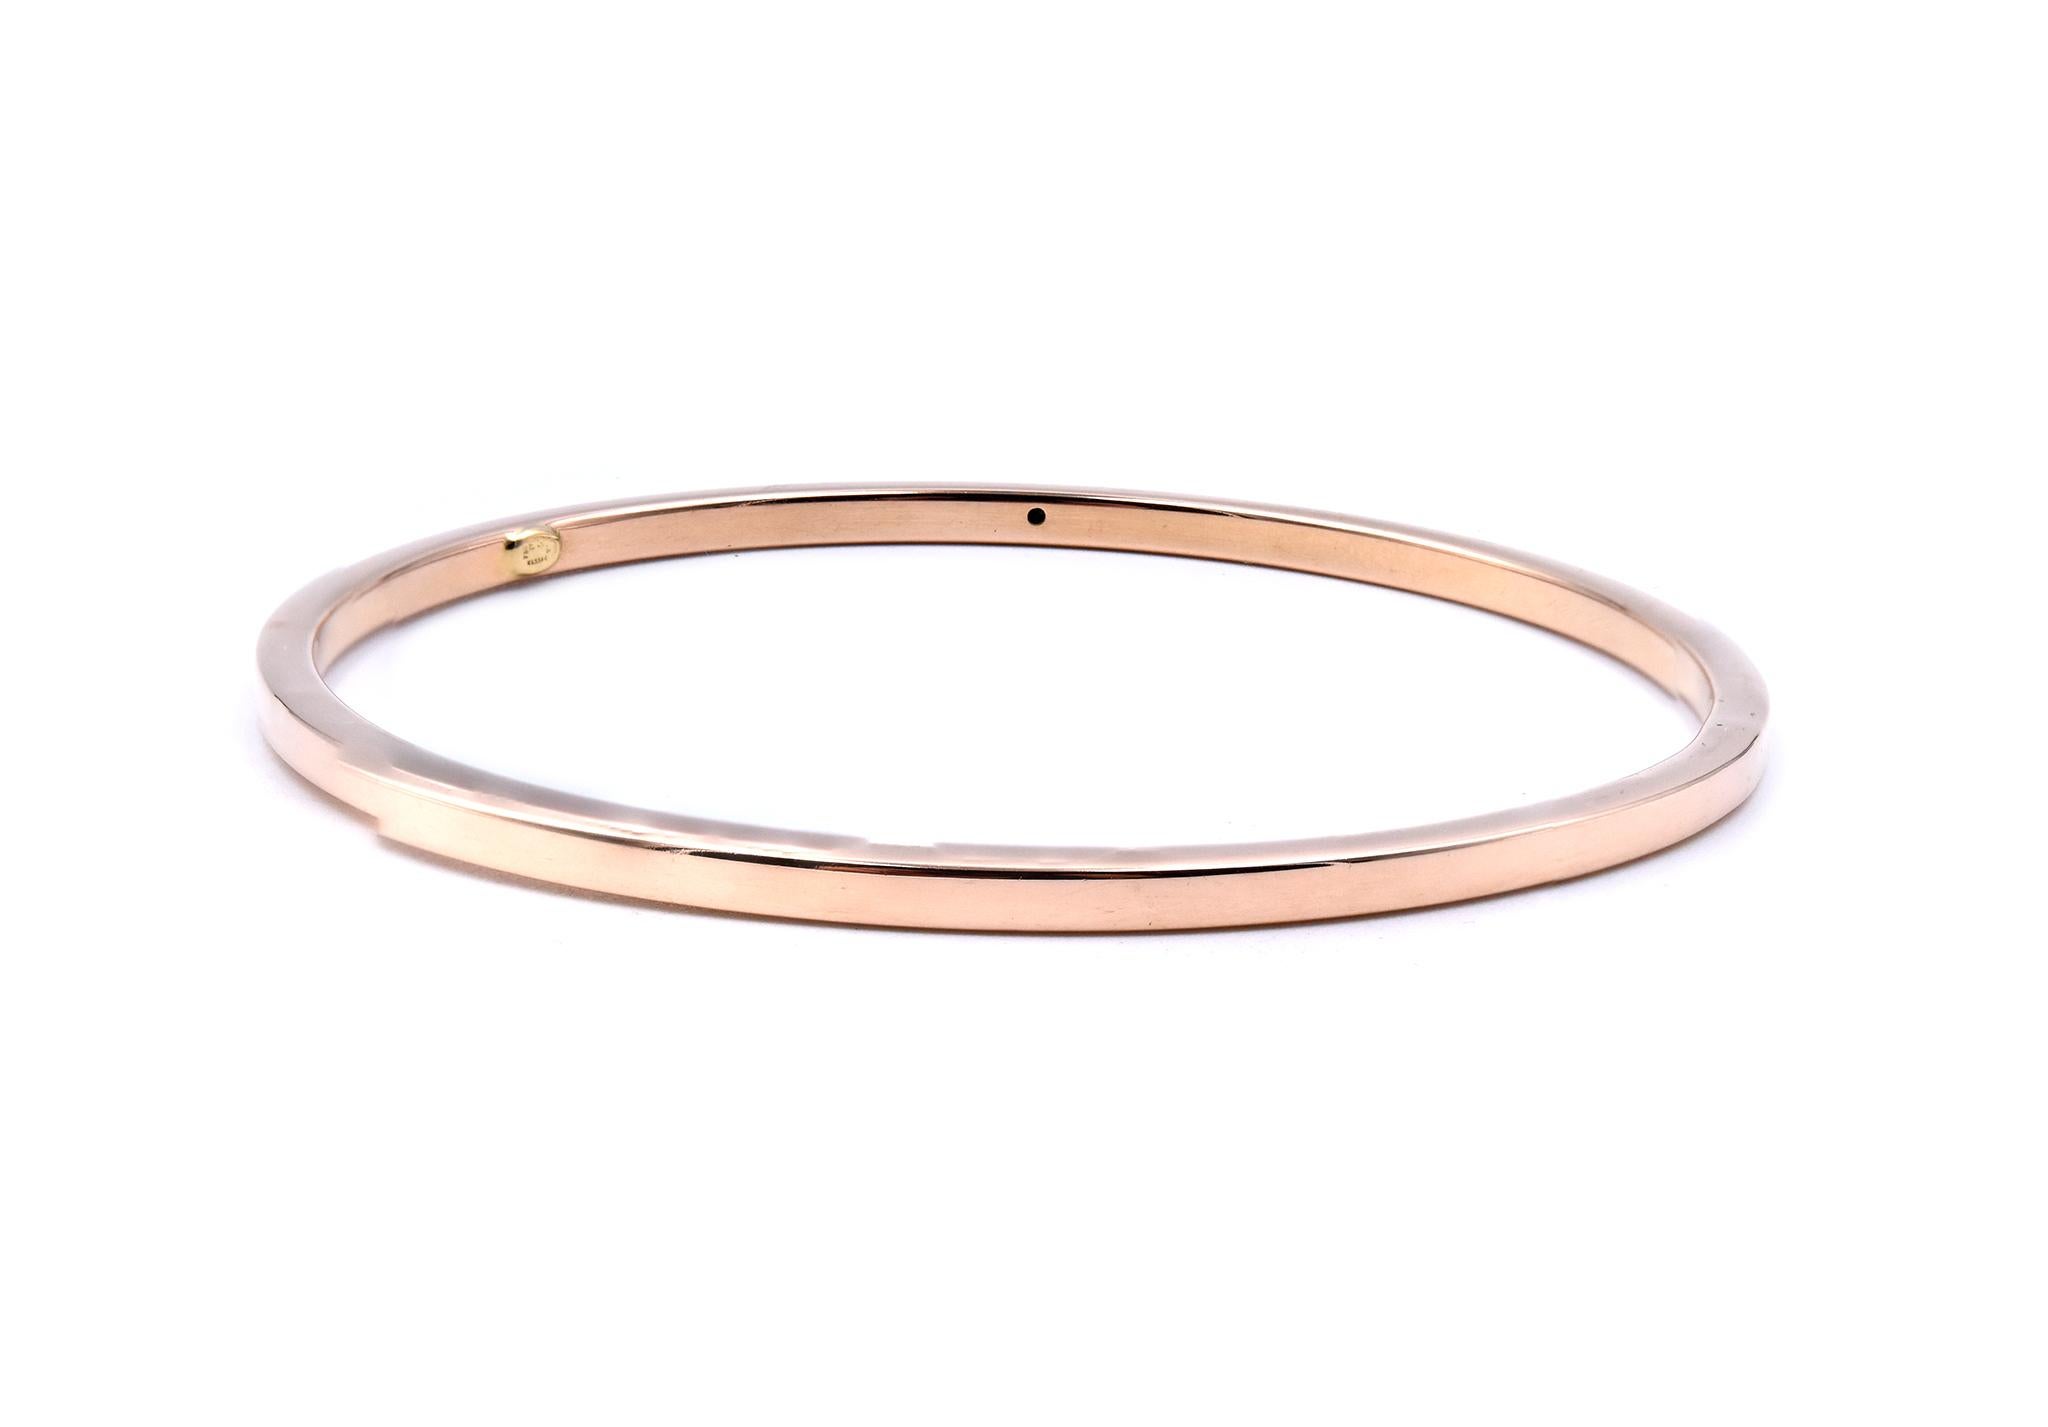 Designer: custom
Material: 18K yellow gold
Dimensions: bracelet will fit up to a 7.5-Inch wrist
Weight: 7.89 grams
